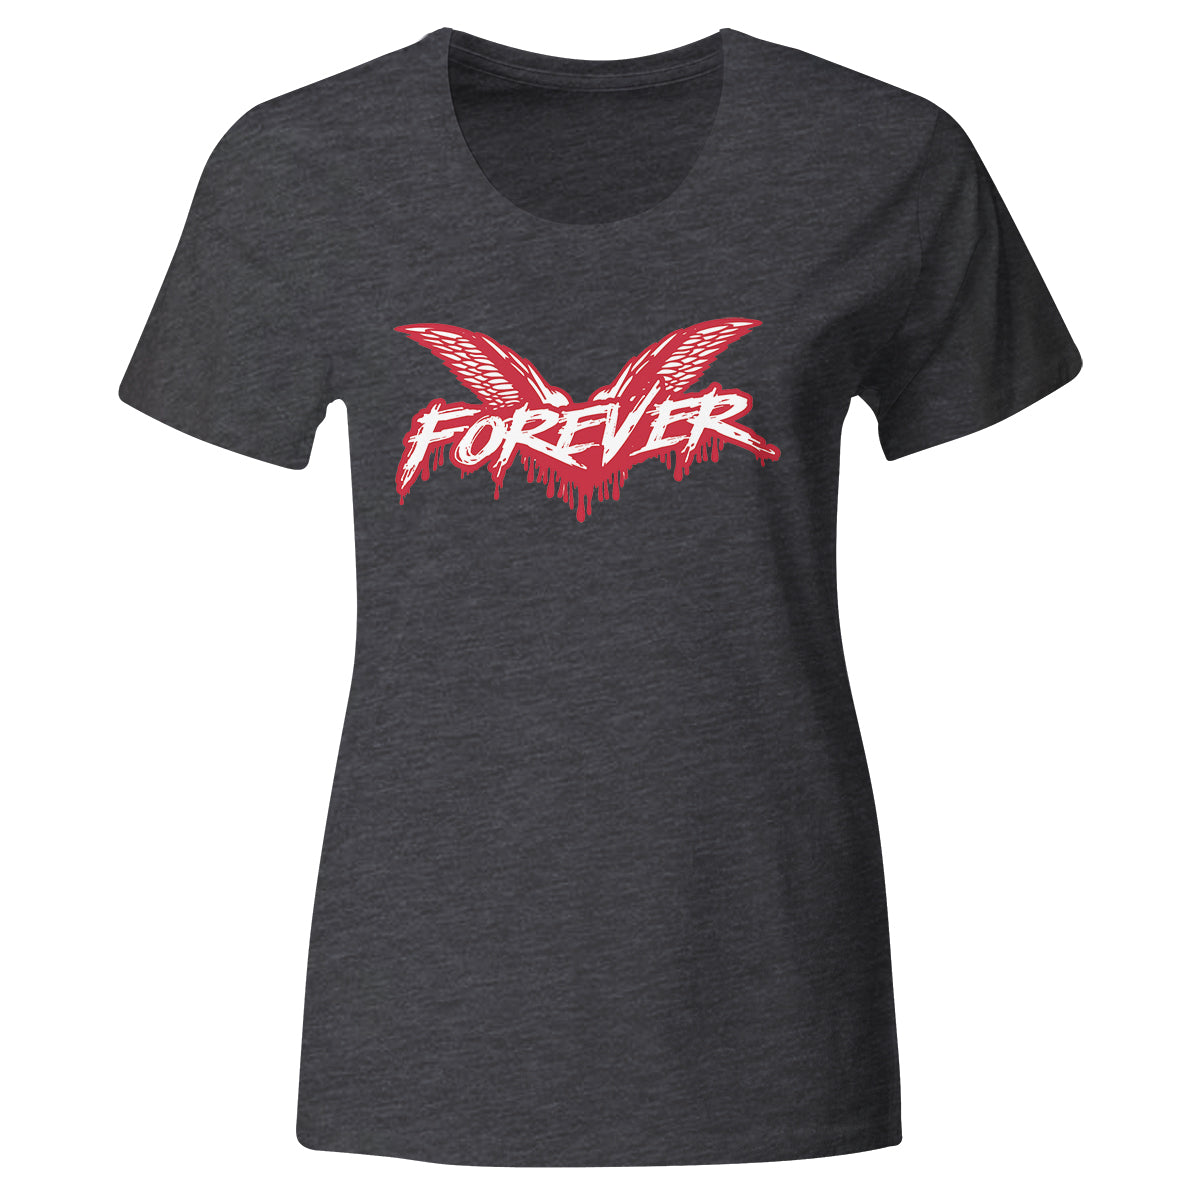 Cock Sparrer - Forever - T-Shirt - Grey - Fitted